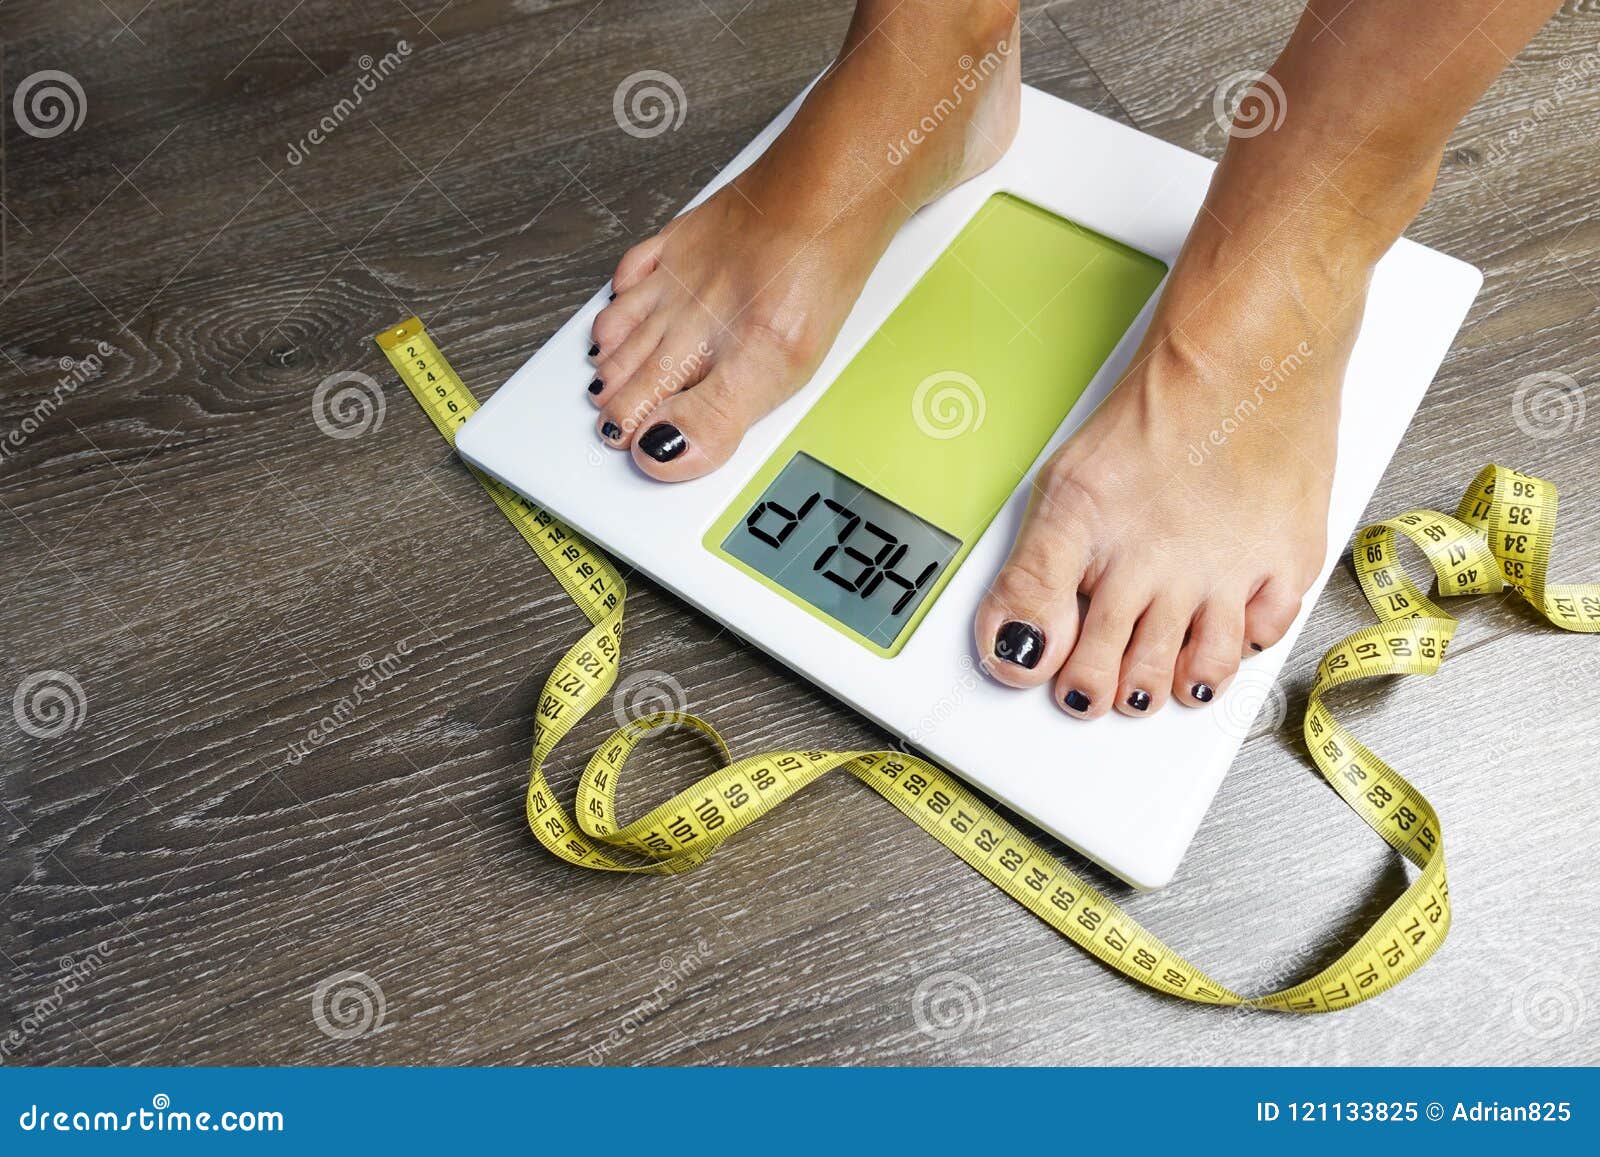 https://thumbs.dreamstime.com/z/weight-problems-concept-woman-feet-scale-help-message-display-weight-problems-concept-woman-feet-scale-121133825.jpg